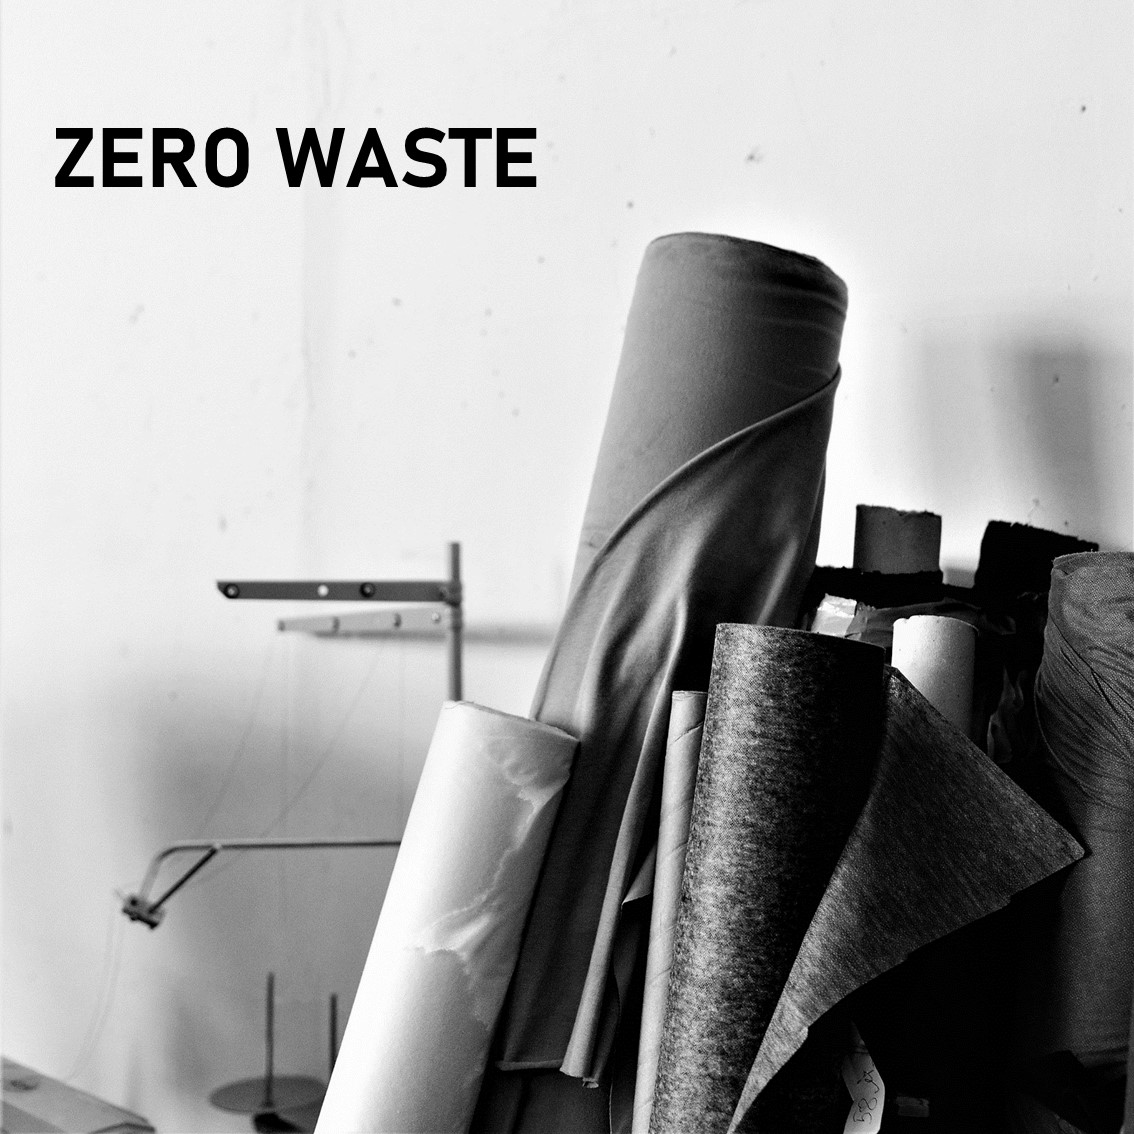 Zero waste: nothing is wasted